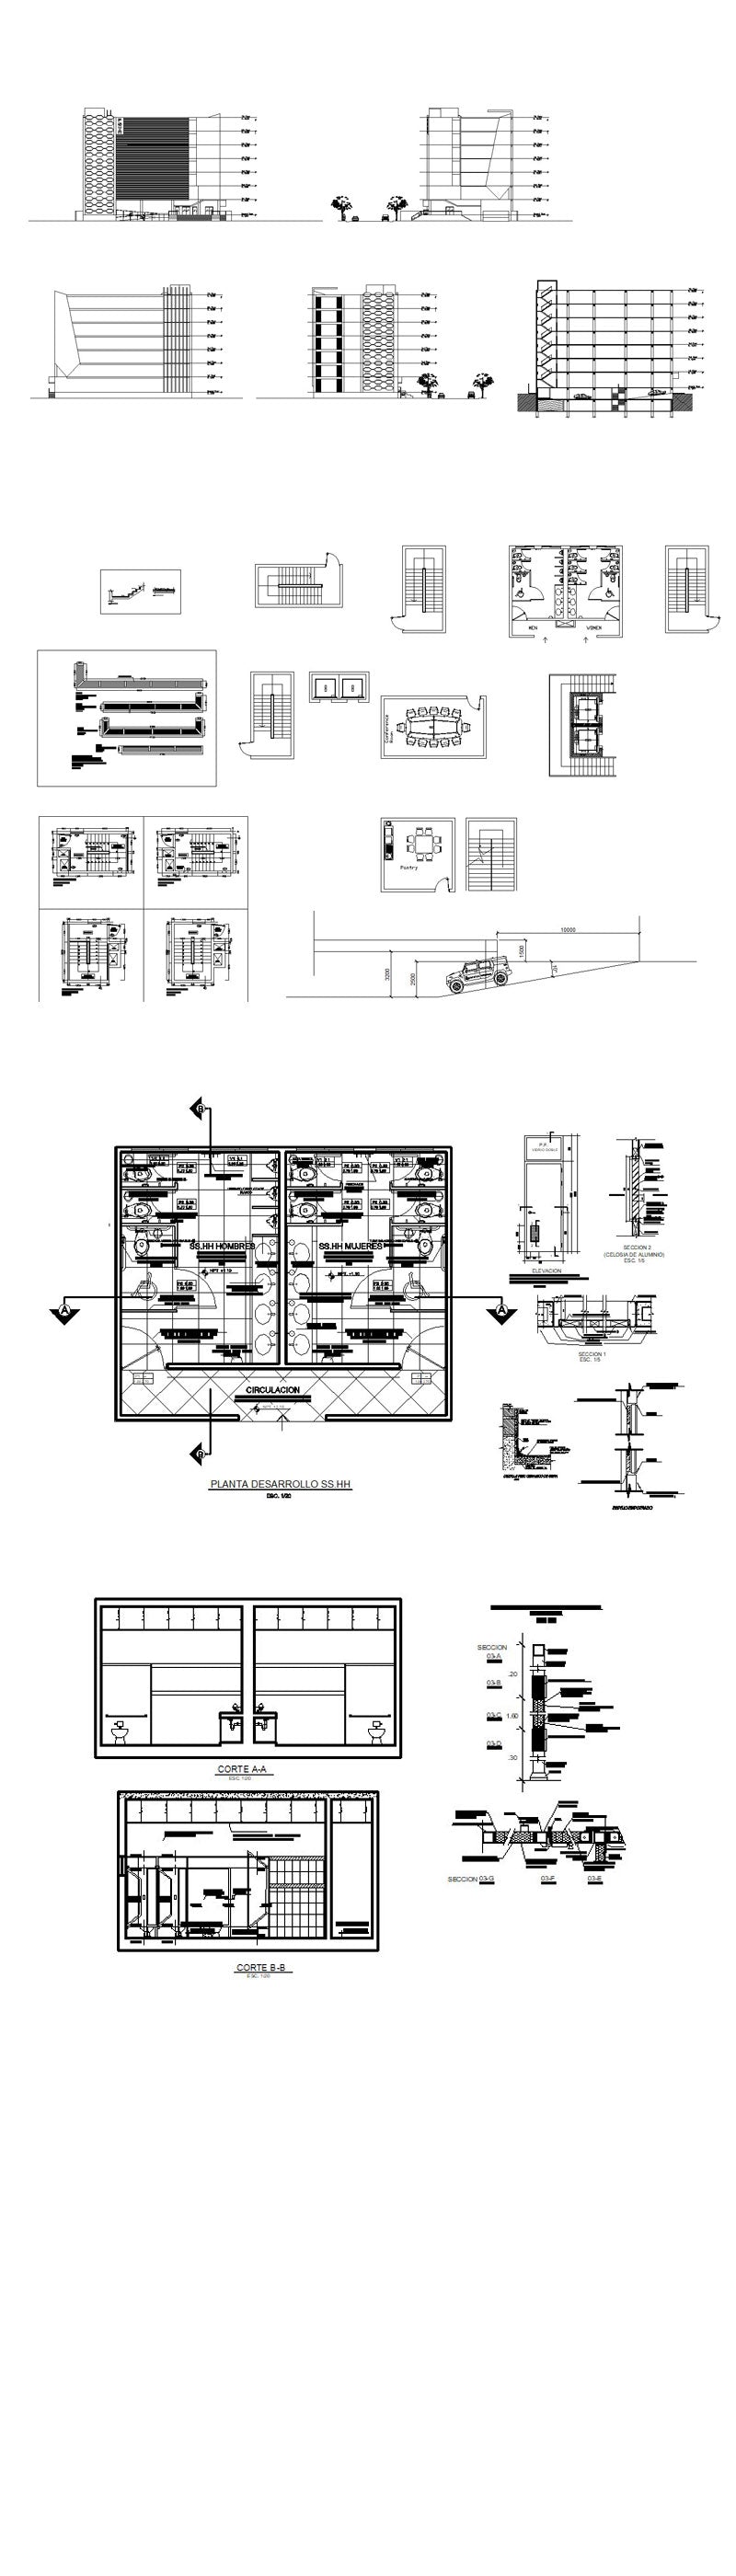 ★【Residential Building CAD Design Collection V.1】Layout,Lobby,Room design,Public facilities,Counter@Autocad Blocks,Drawings,CAD Details,Elevation